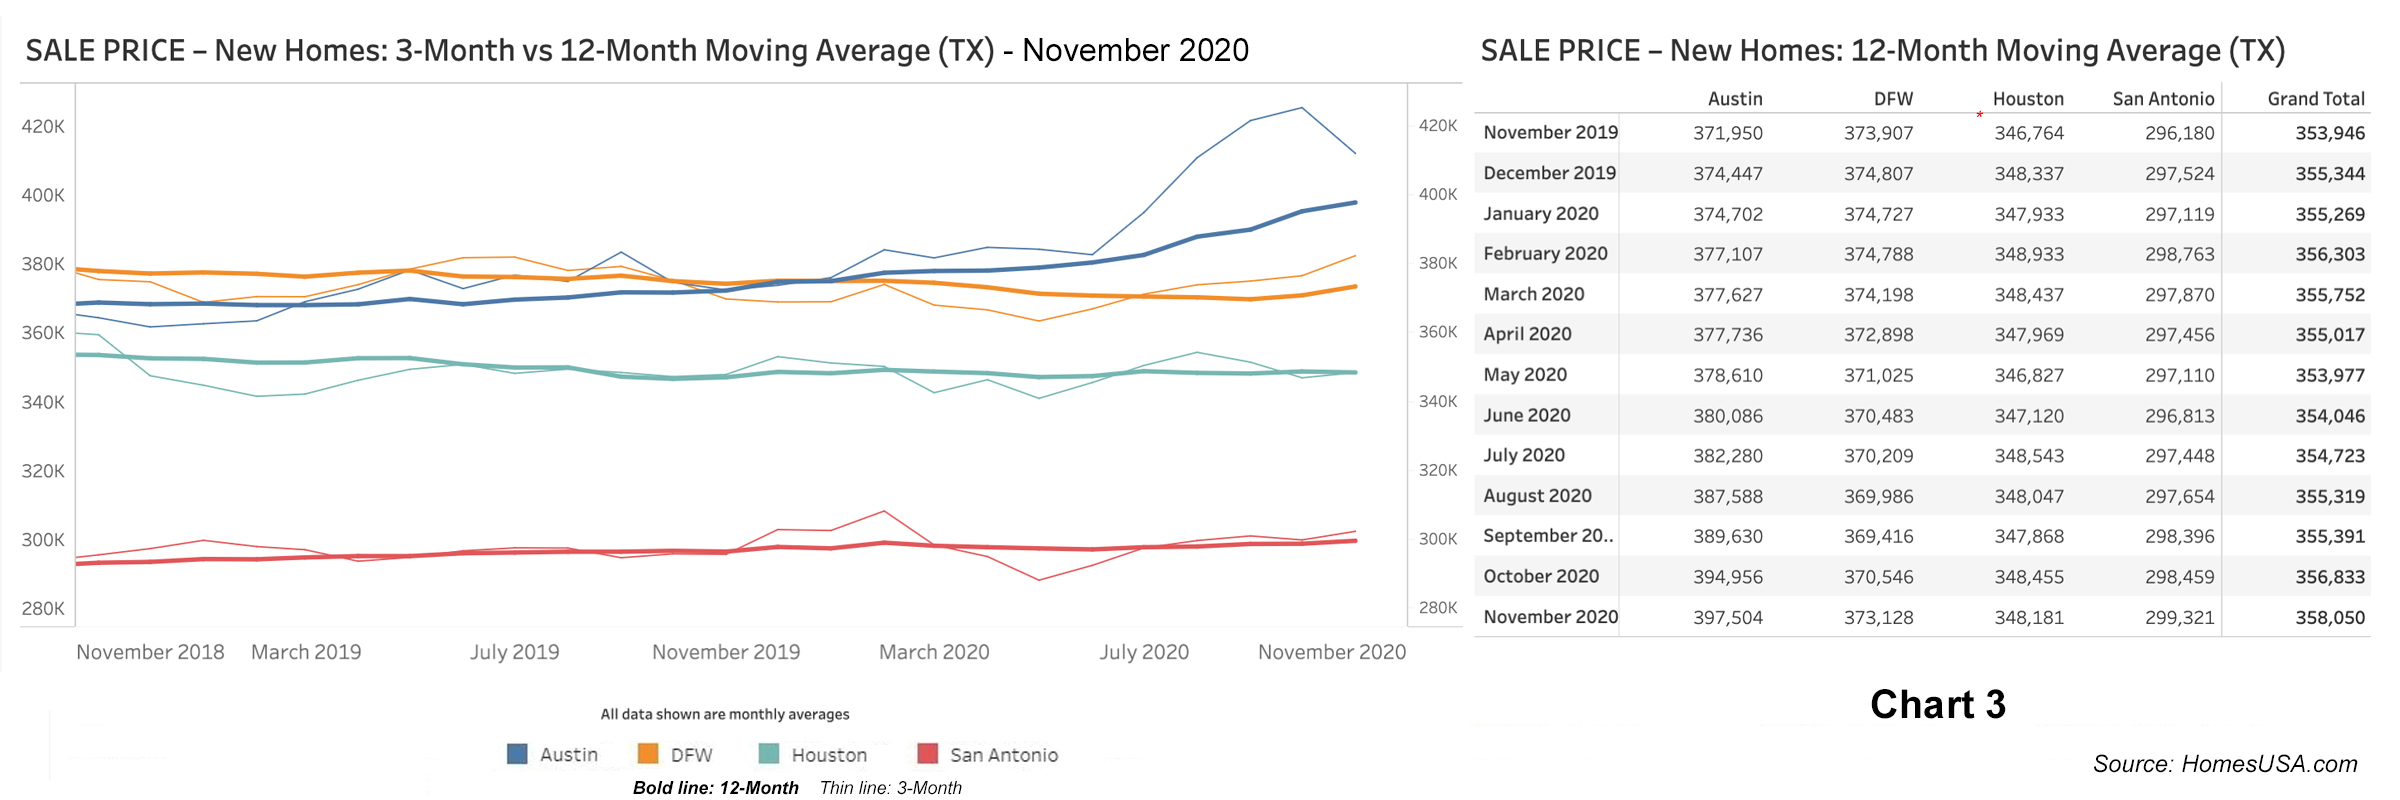 Chart 3: Texas New Home Prices - November 2020